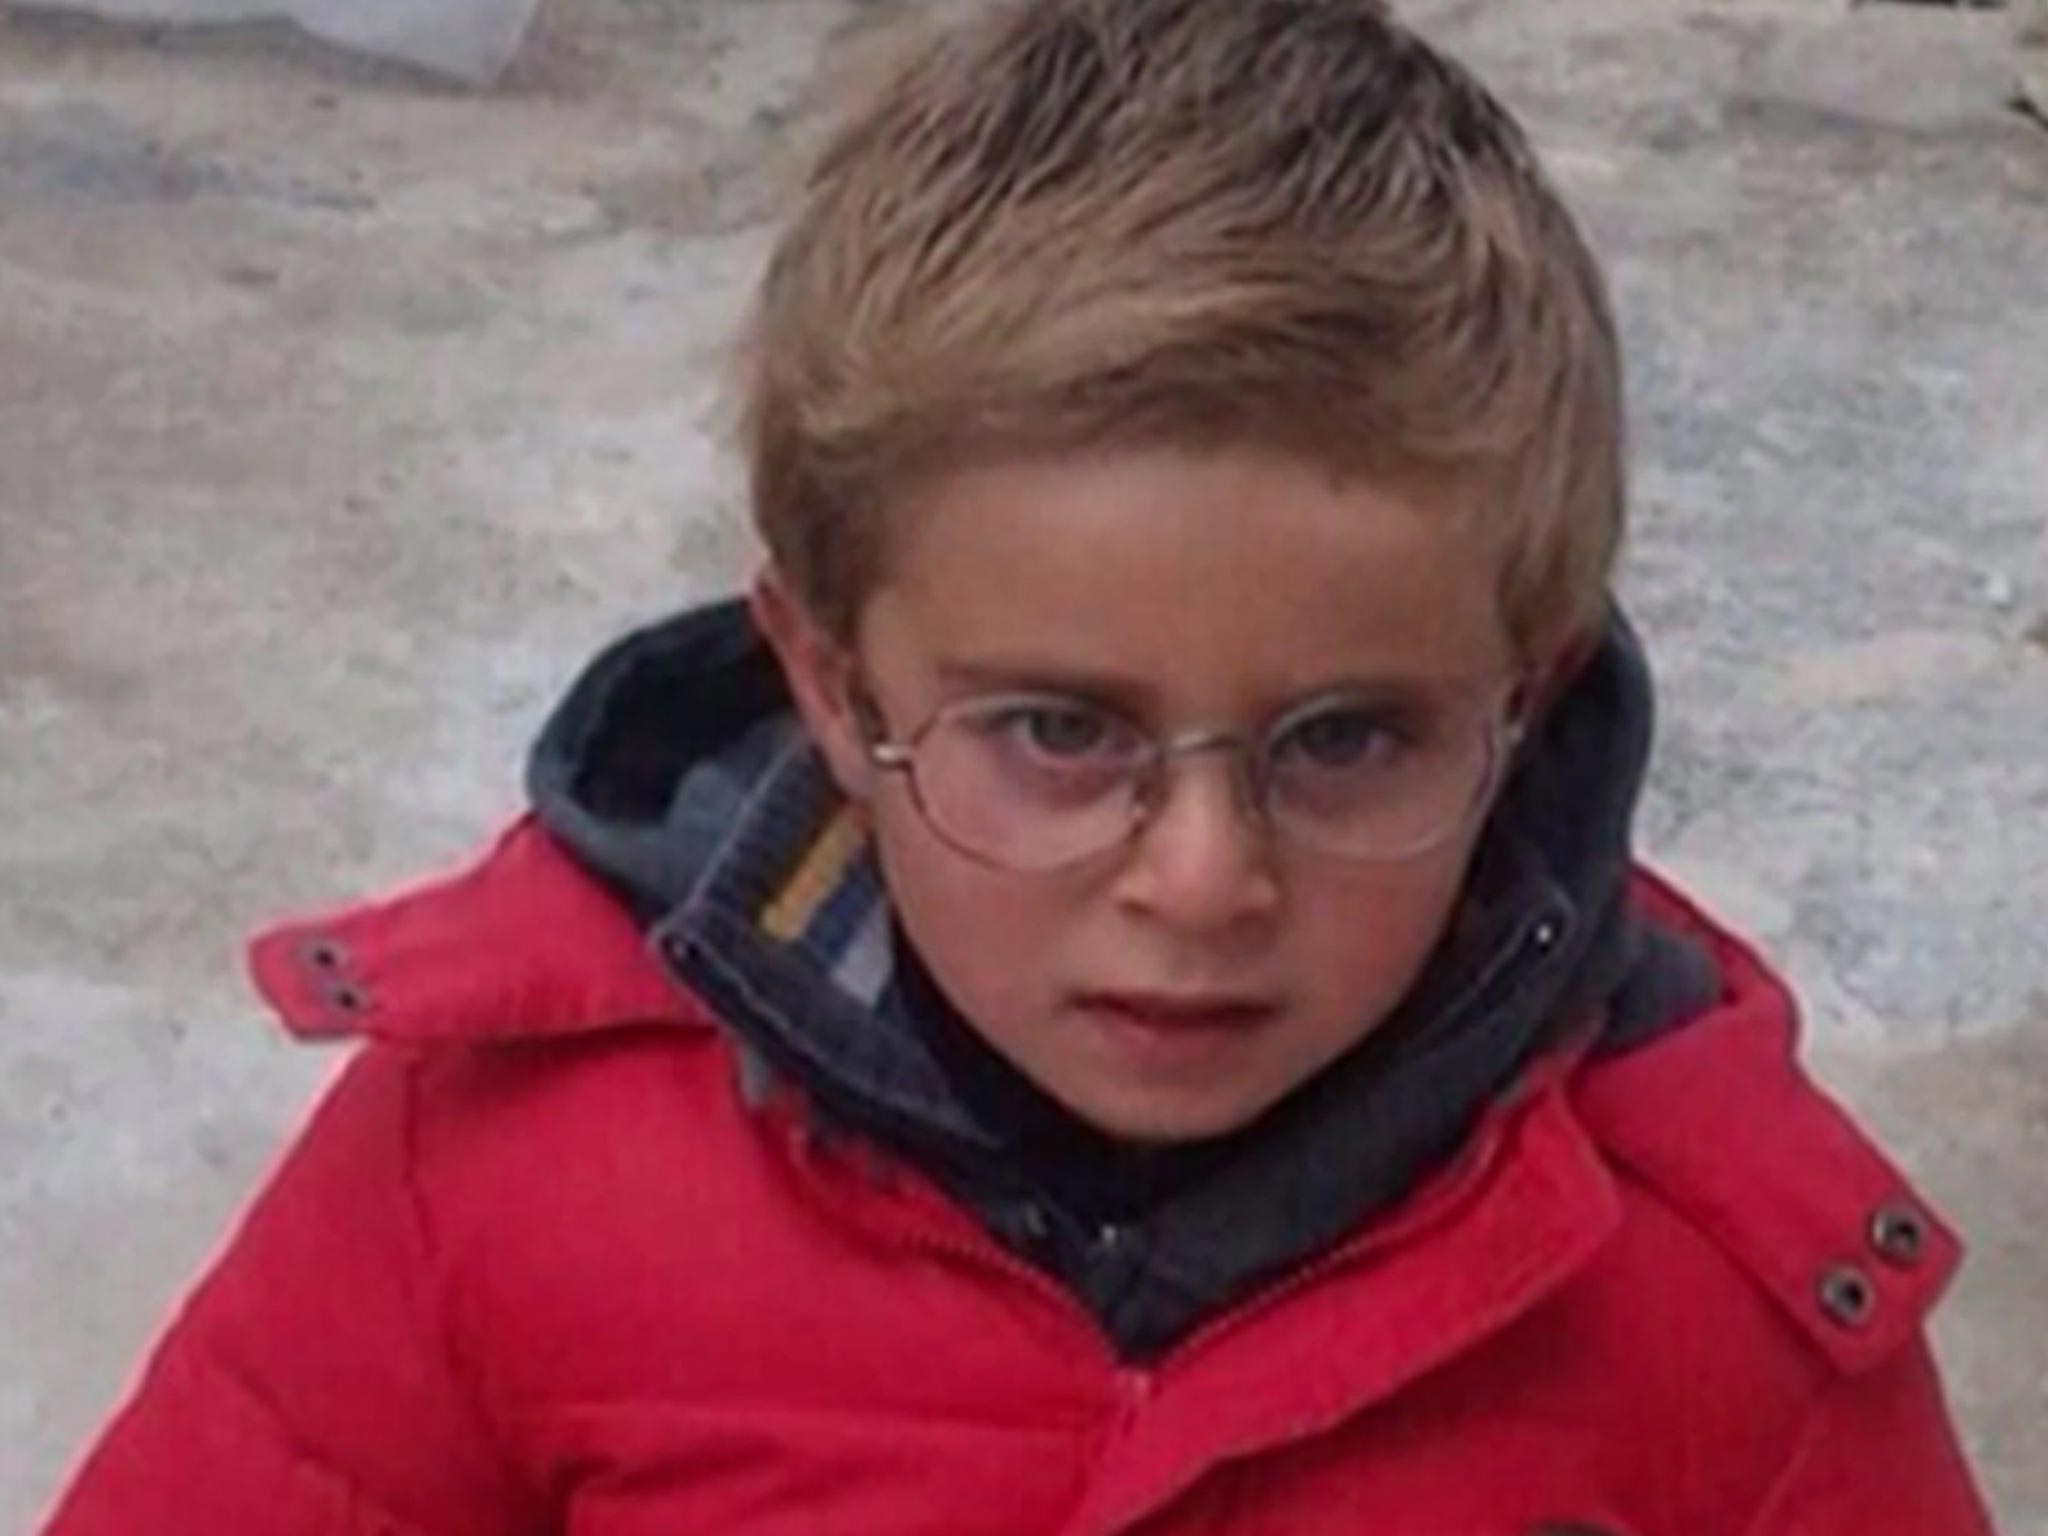 Six-year-old Muadh Zain was stranded in Syria for three years